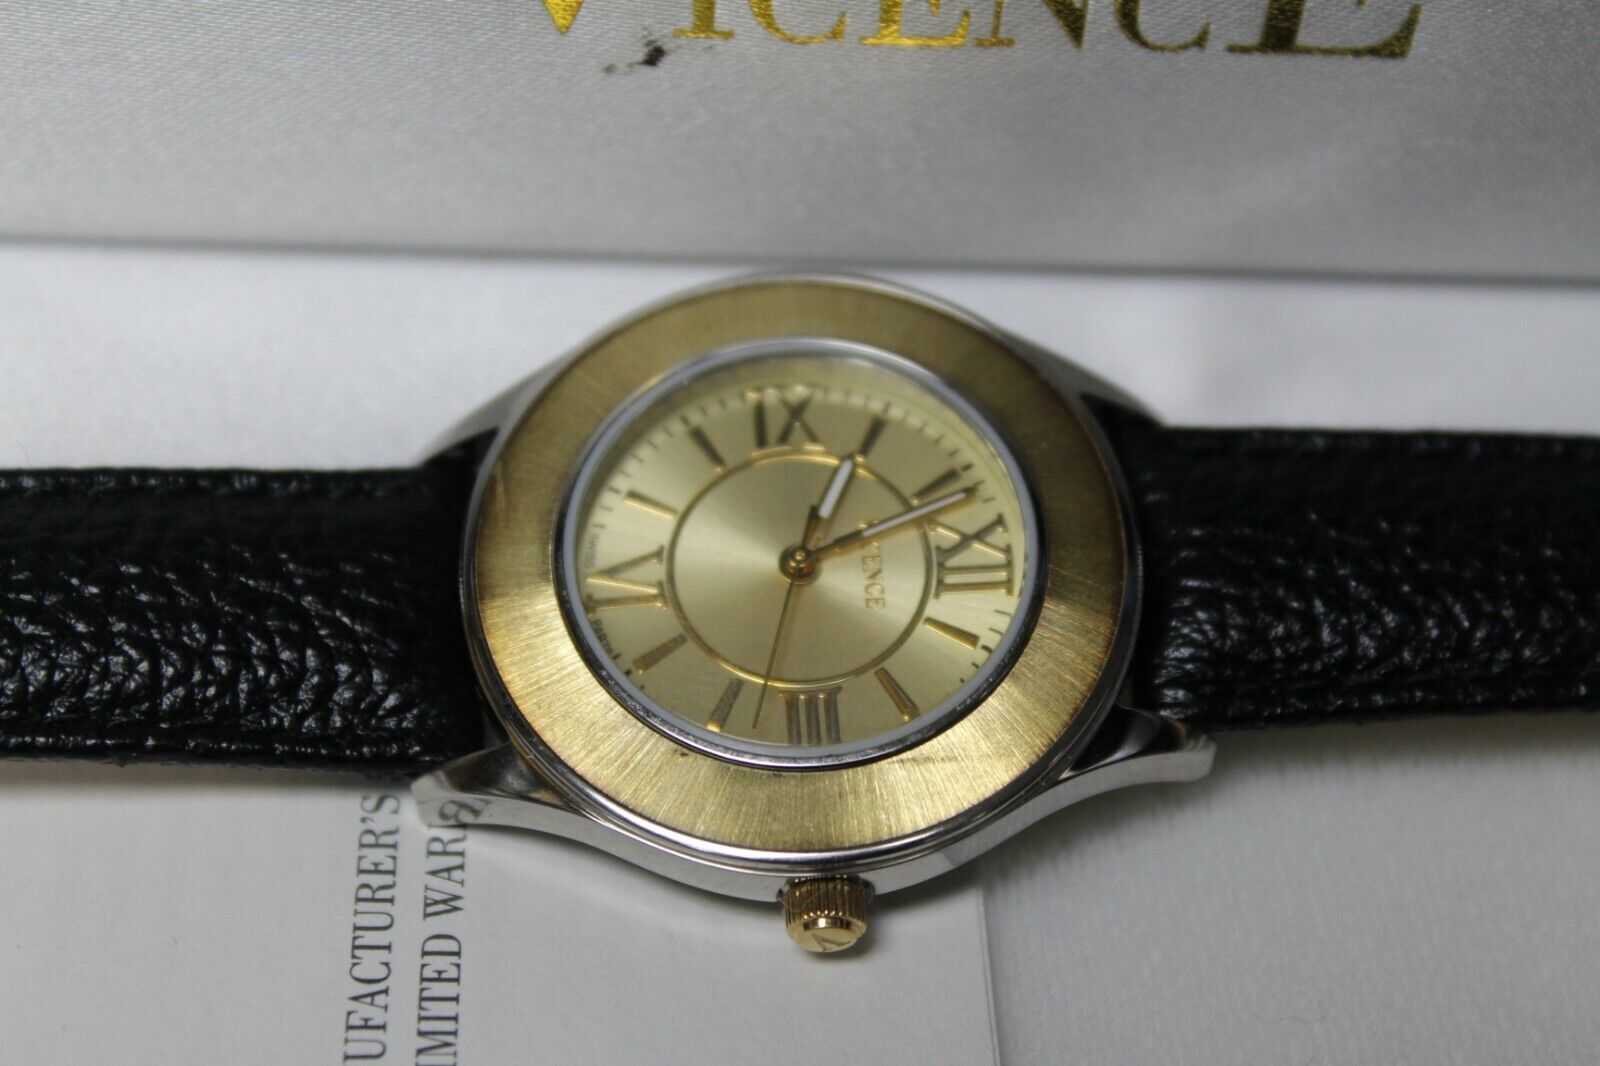 VICENCE STAINLESS WATCH w/ COWHIDE BAND & 14k GOLD BEZEL